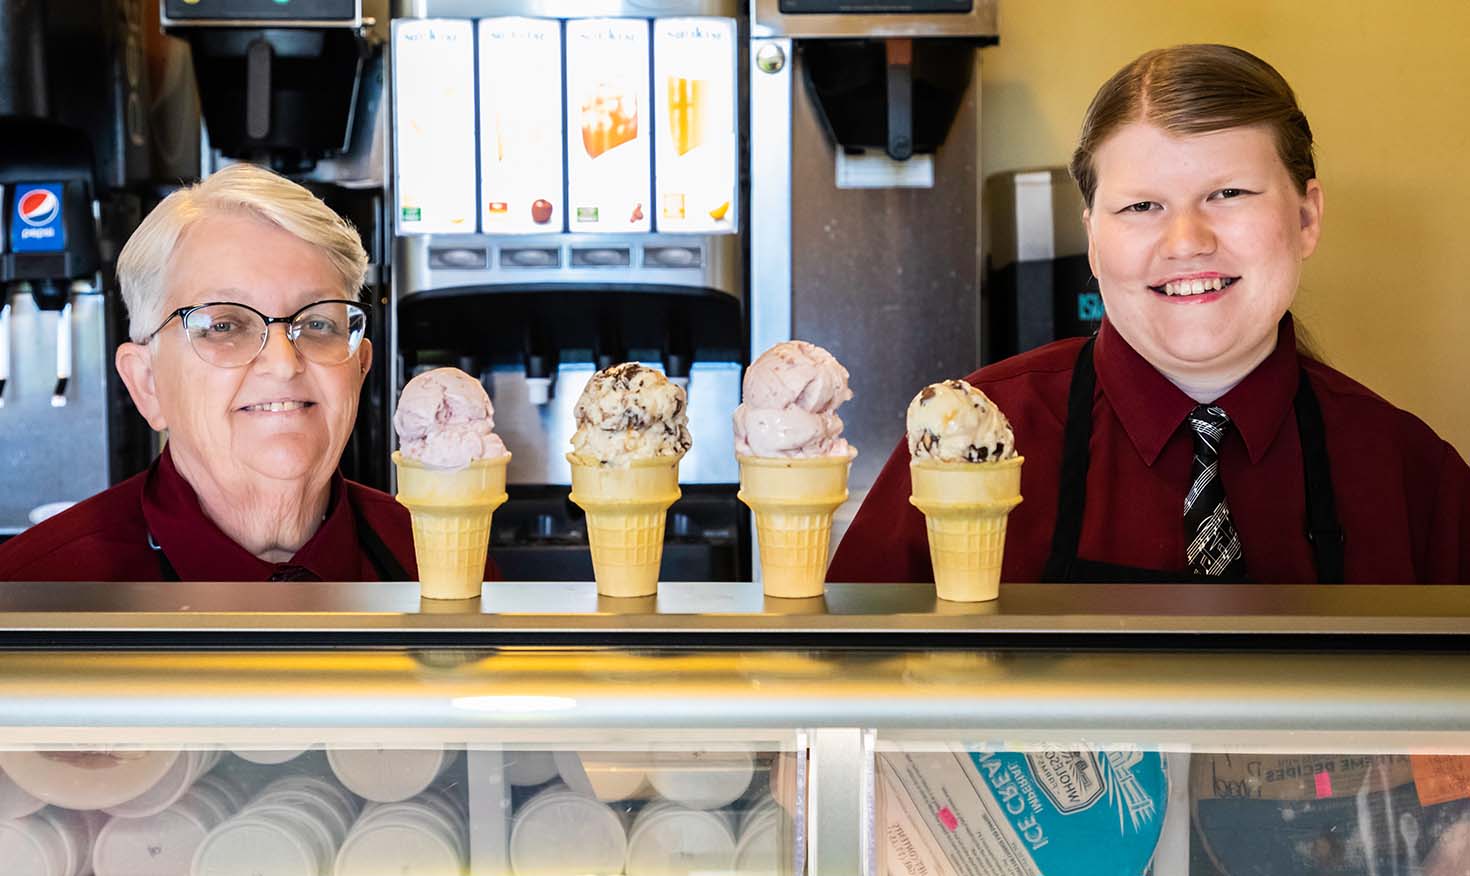 Workers behind the counter of an ice cream parlor with four ice cream cones on the counter